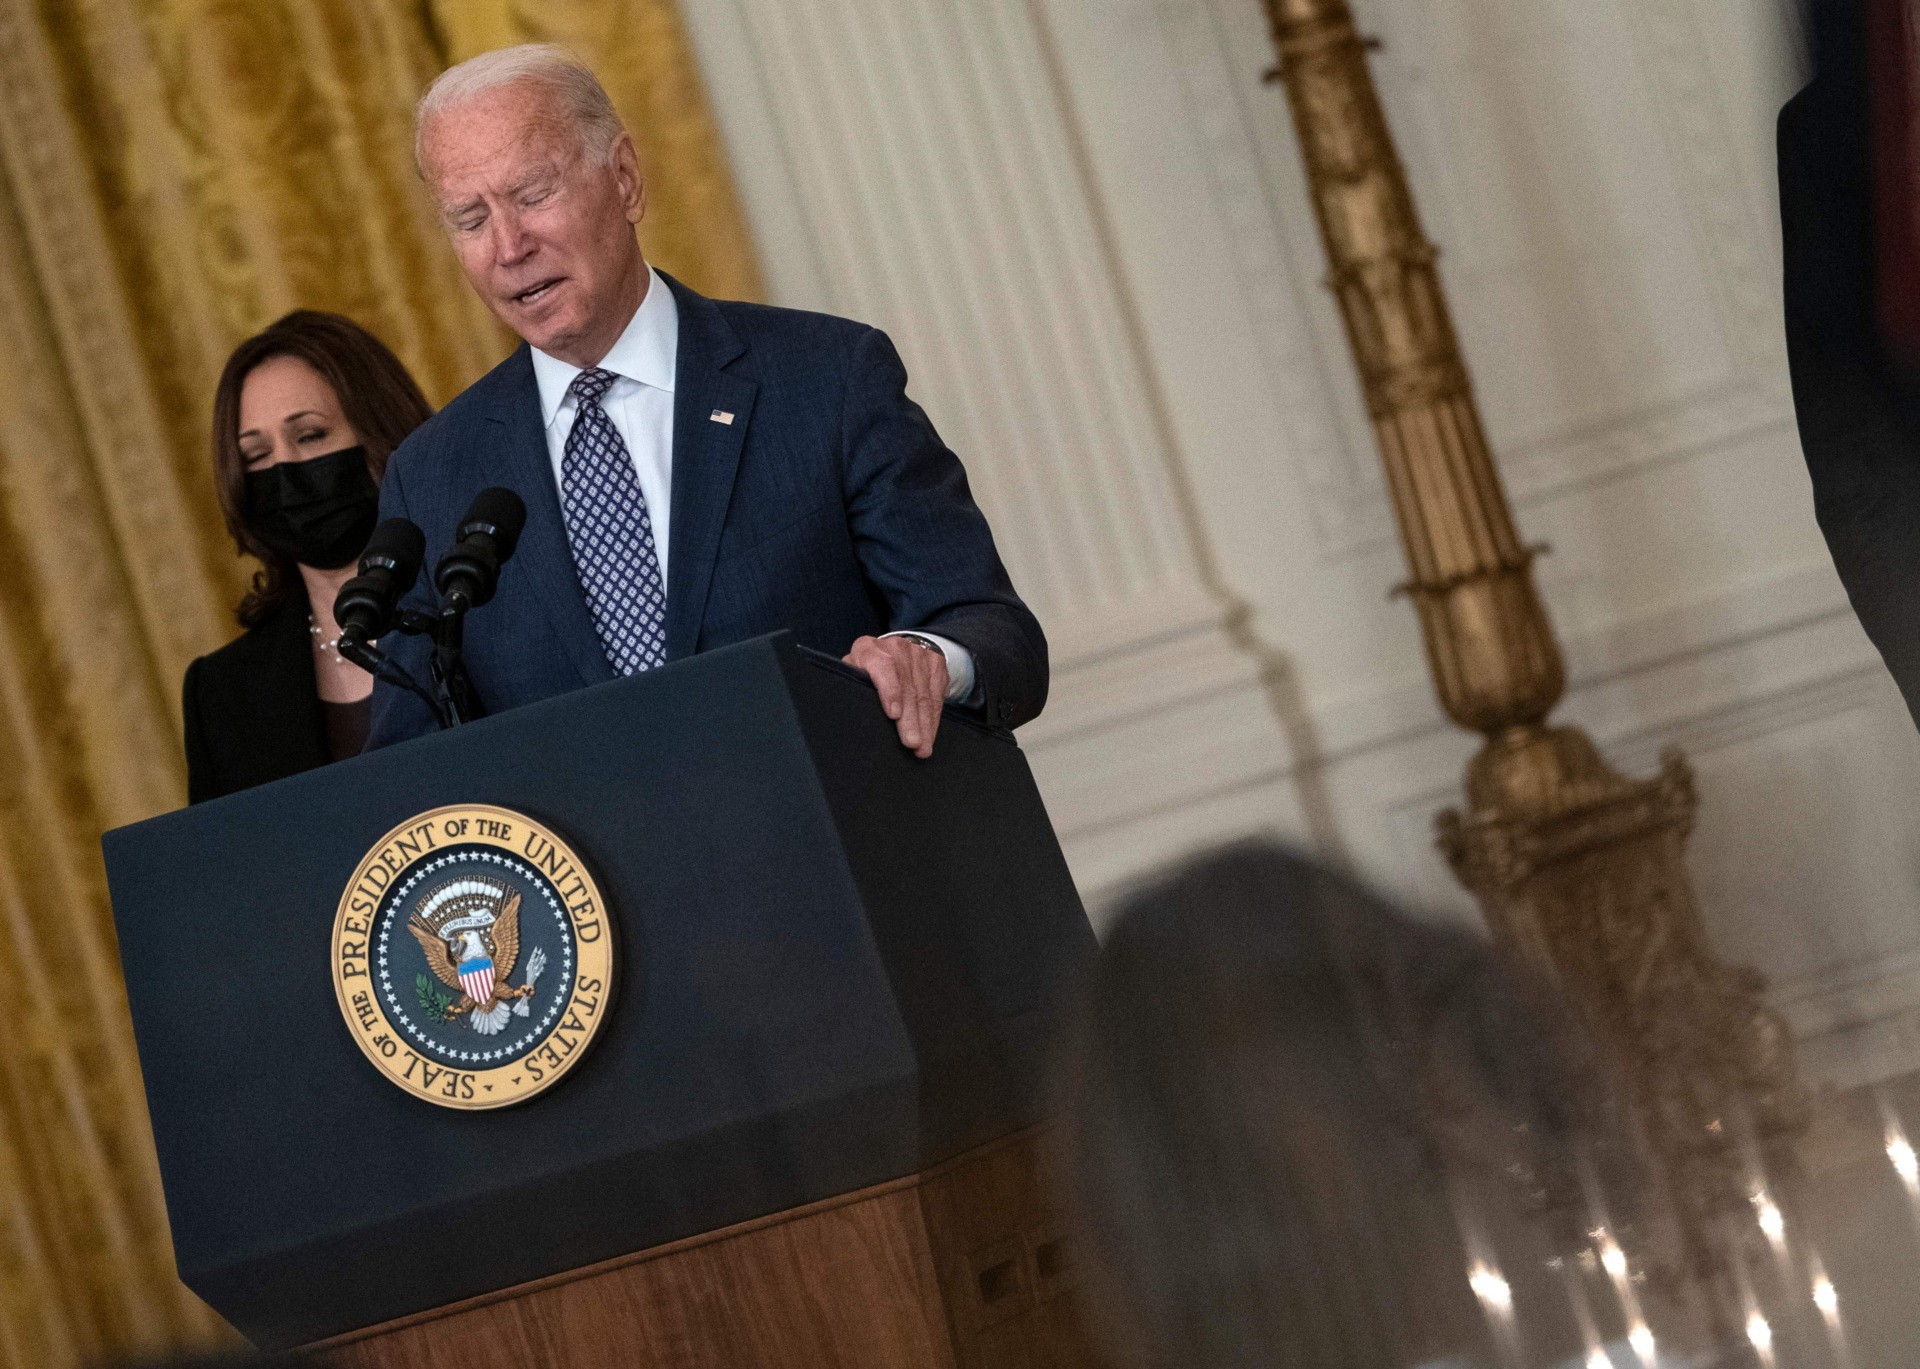 US President Joe Biden, with Vice President Kamala Harris, responds to questions about the ongoing US military evacuations of US citizens and vulnerable Afghans, in the East Room of the White House in Washington, DC, on August 20, 2021. - Biden said Friday he has not seen America's allies question US credibility over the conduct of its withdrawal from Afghanistan as the Taliban took over the country. (Photo by ANDREW CABALLERO-REYNOLDS / AFP) (Photo by ANDREW CABALLERO-REYNOLDS/AFP via Getty Images)